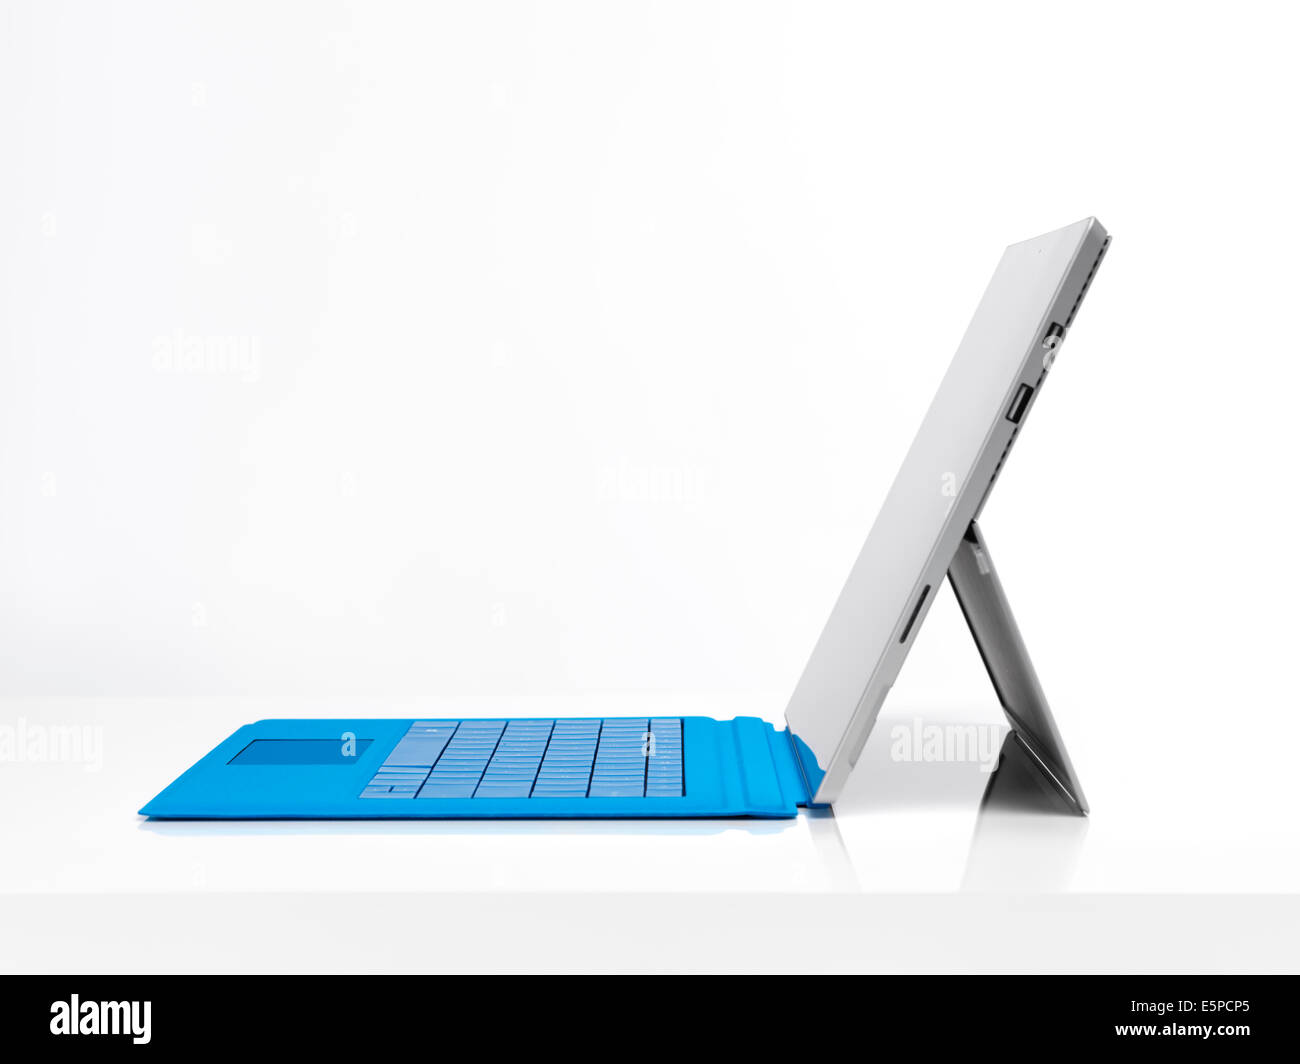 Microsoft Surface Pro 3 tablet computer with a blue keyboard side view  isolated on white background Stock Photo - Alamy